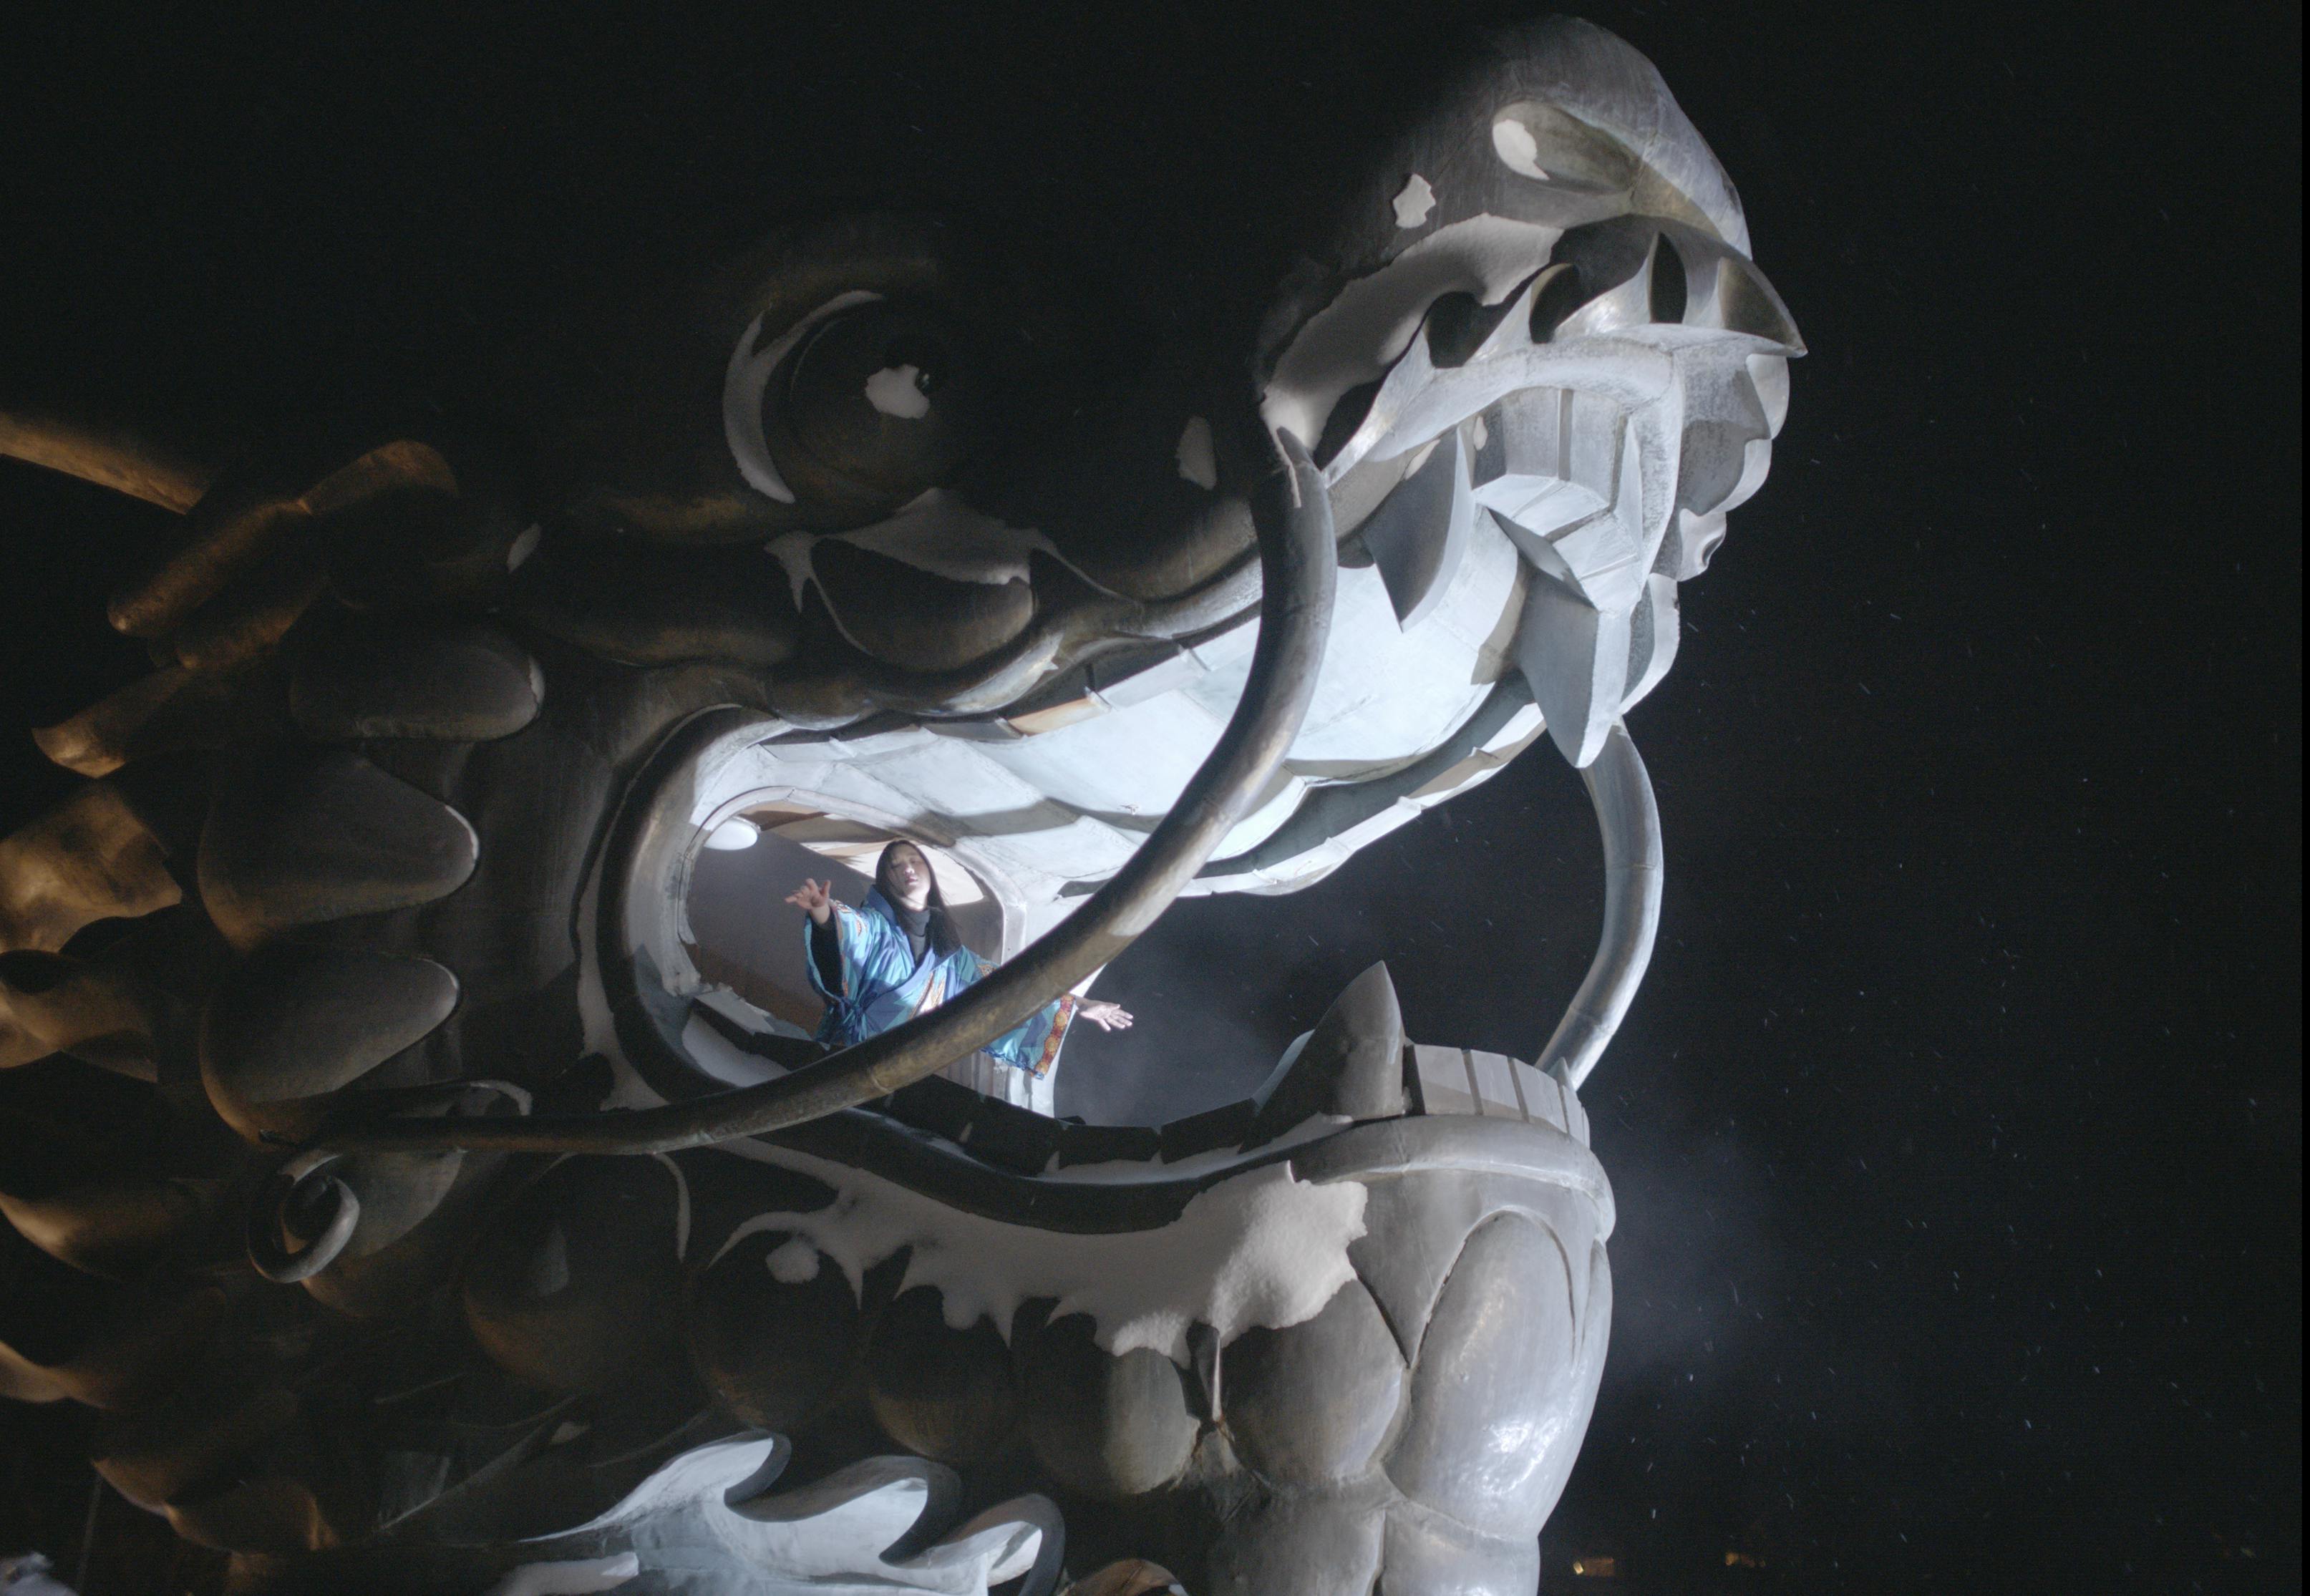 An Asian woman blue embroidered kimono stands with outstretched arms within the open mouth of a Chinese dragon sculpture. The image is taken from a film still. The still has been captured at night, and the dragon is lit from below.